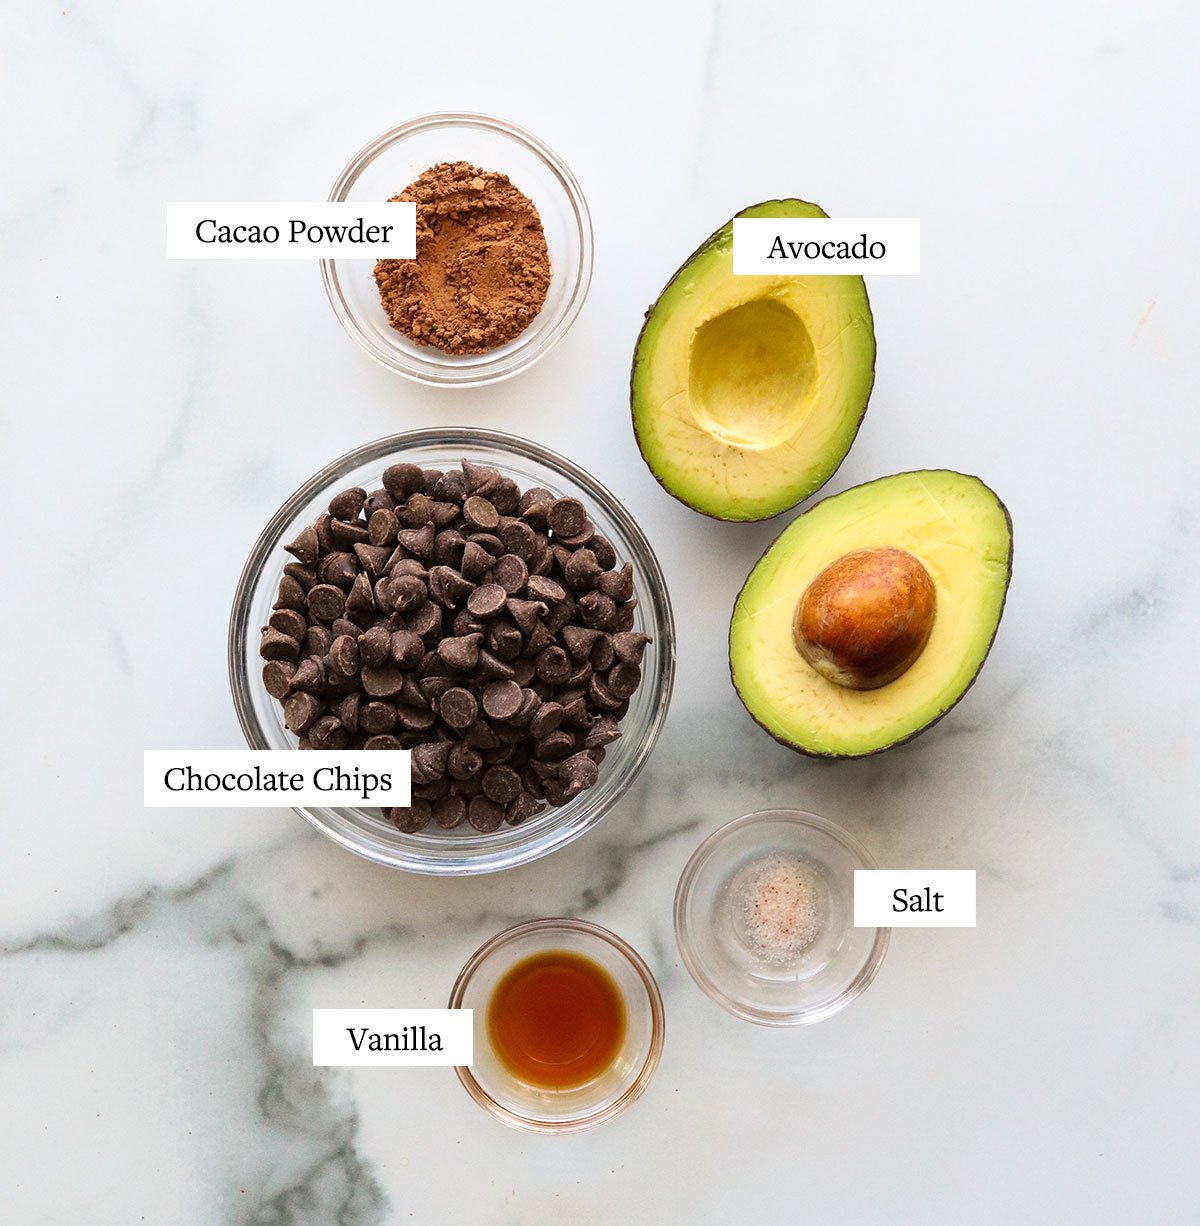 avocado truffle ingredients labeled on a marble surface.